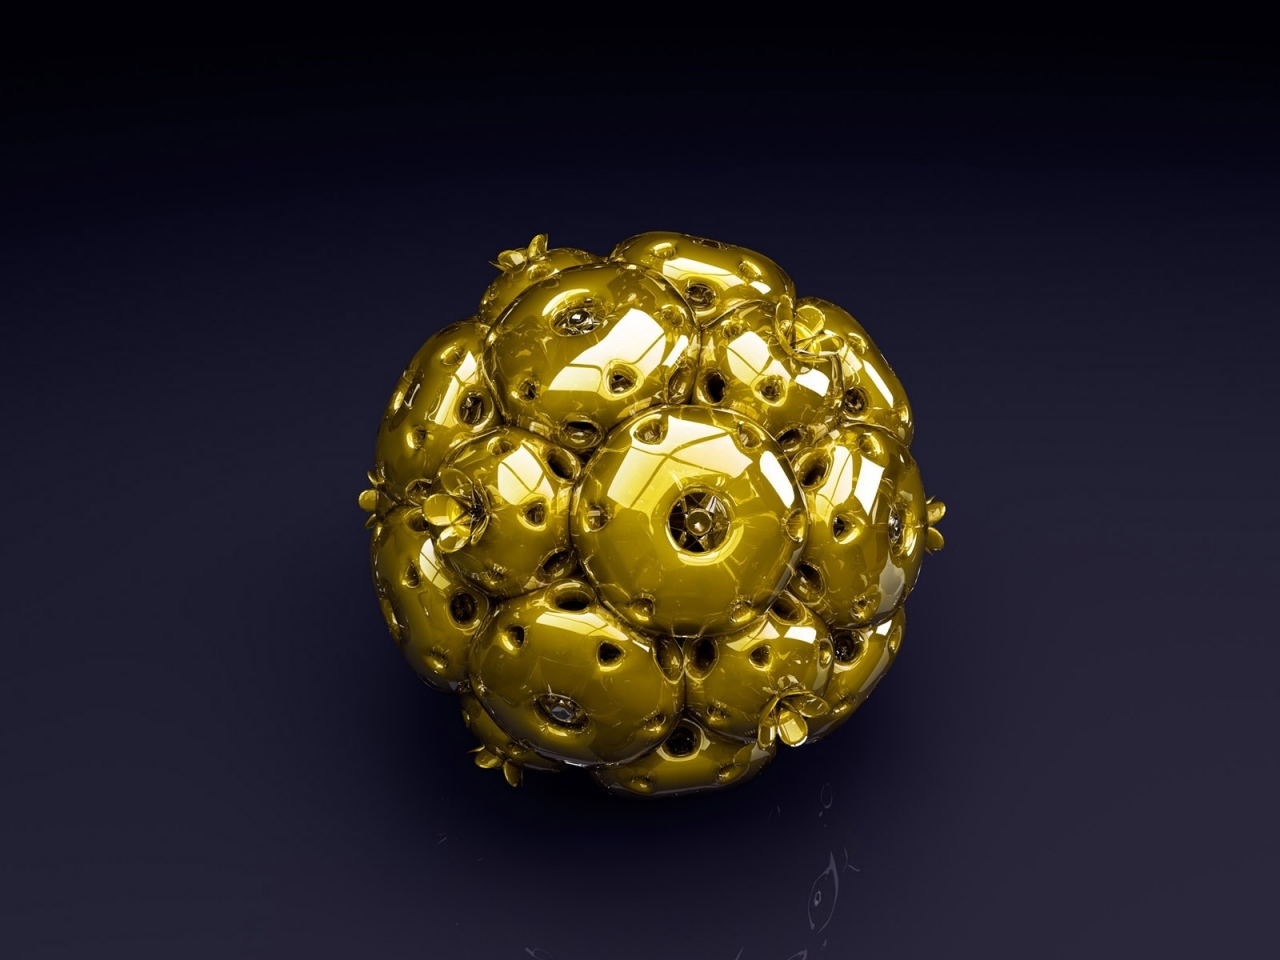 Gold Ball for 1280 x 960 resolution